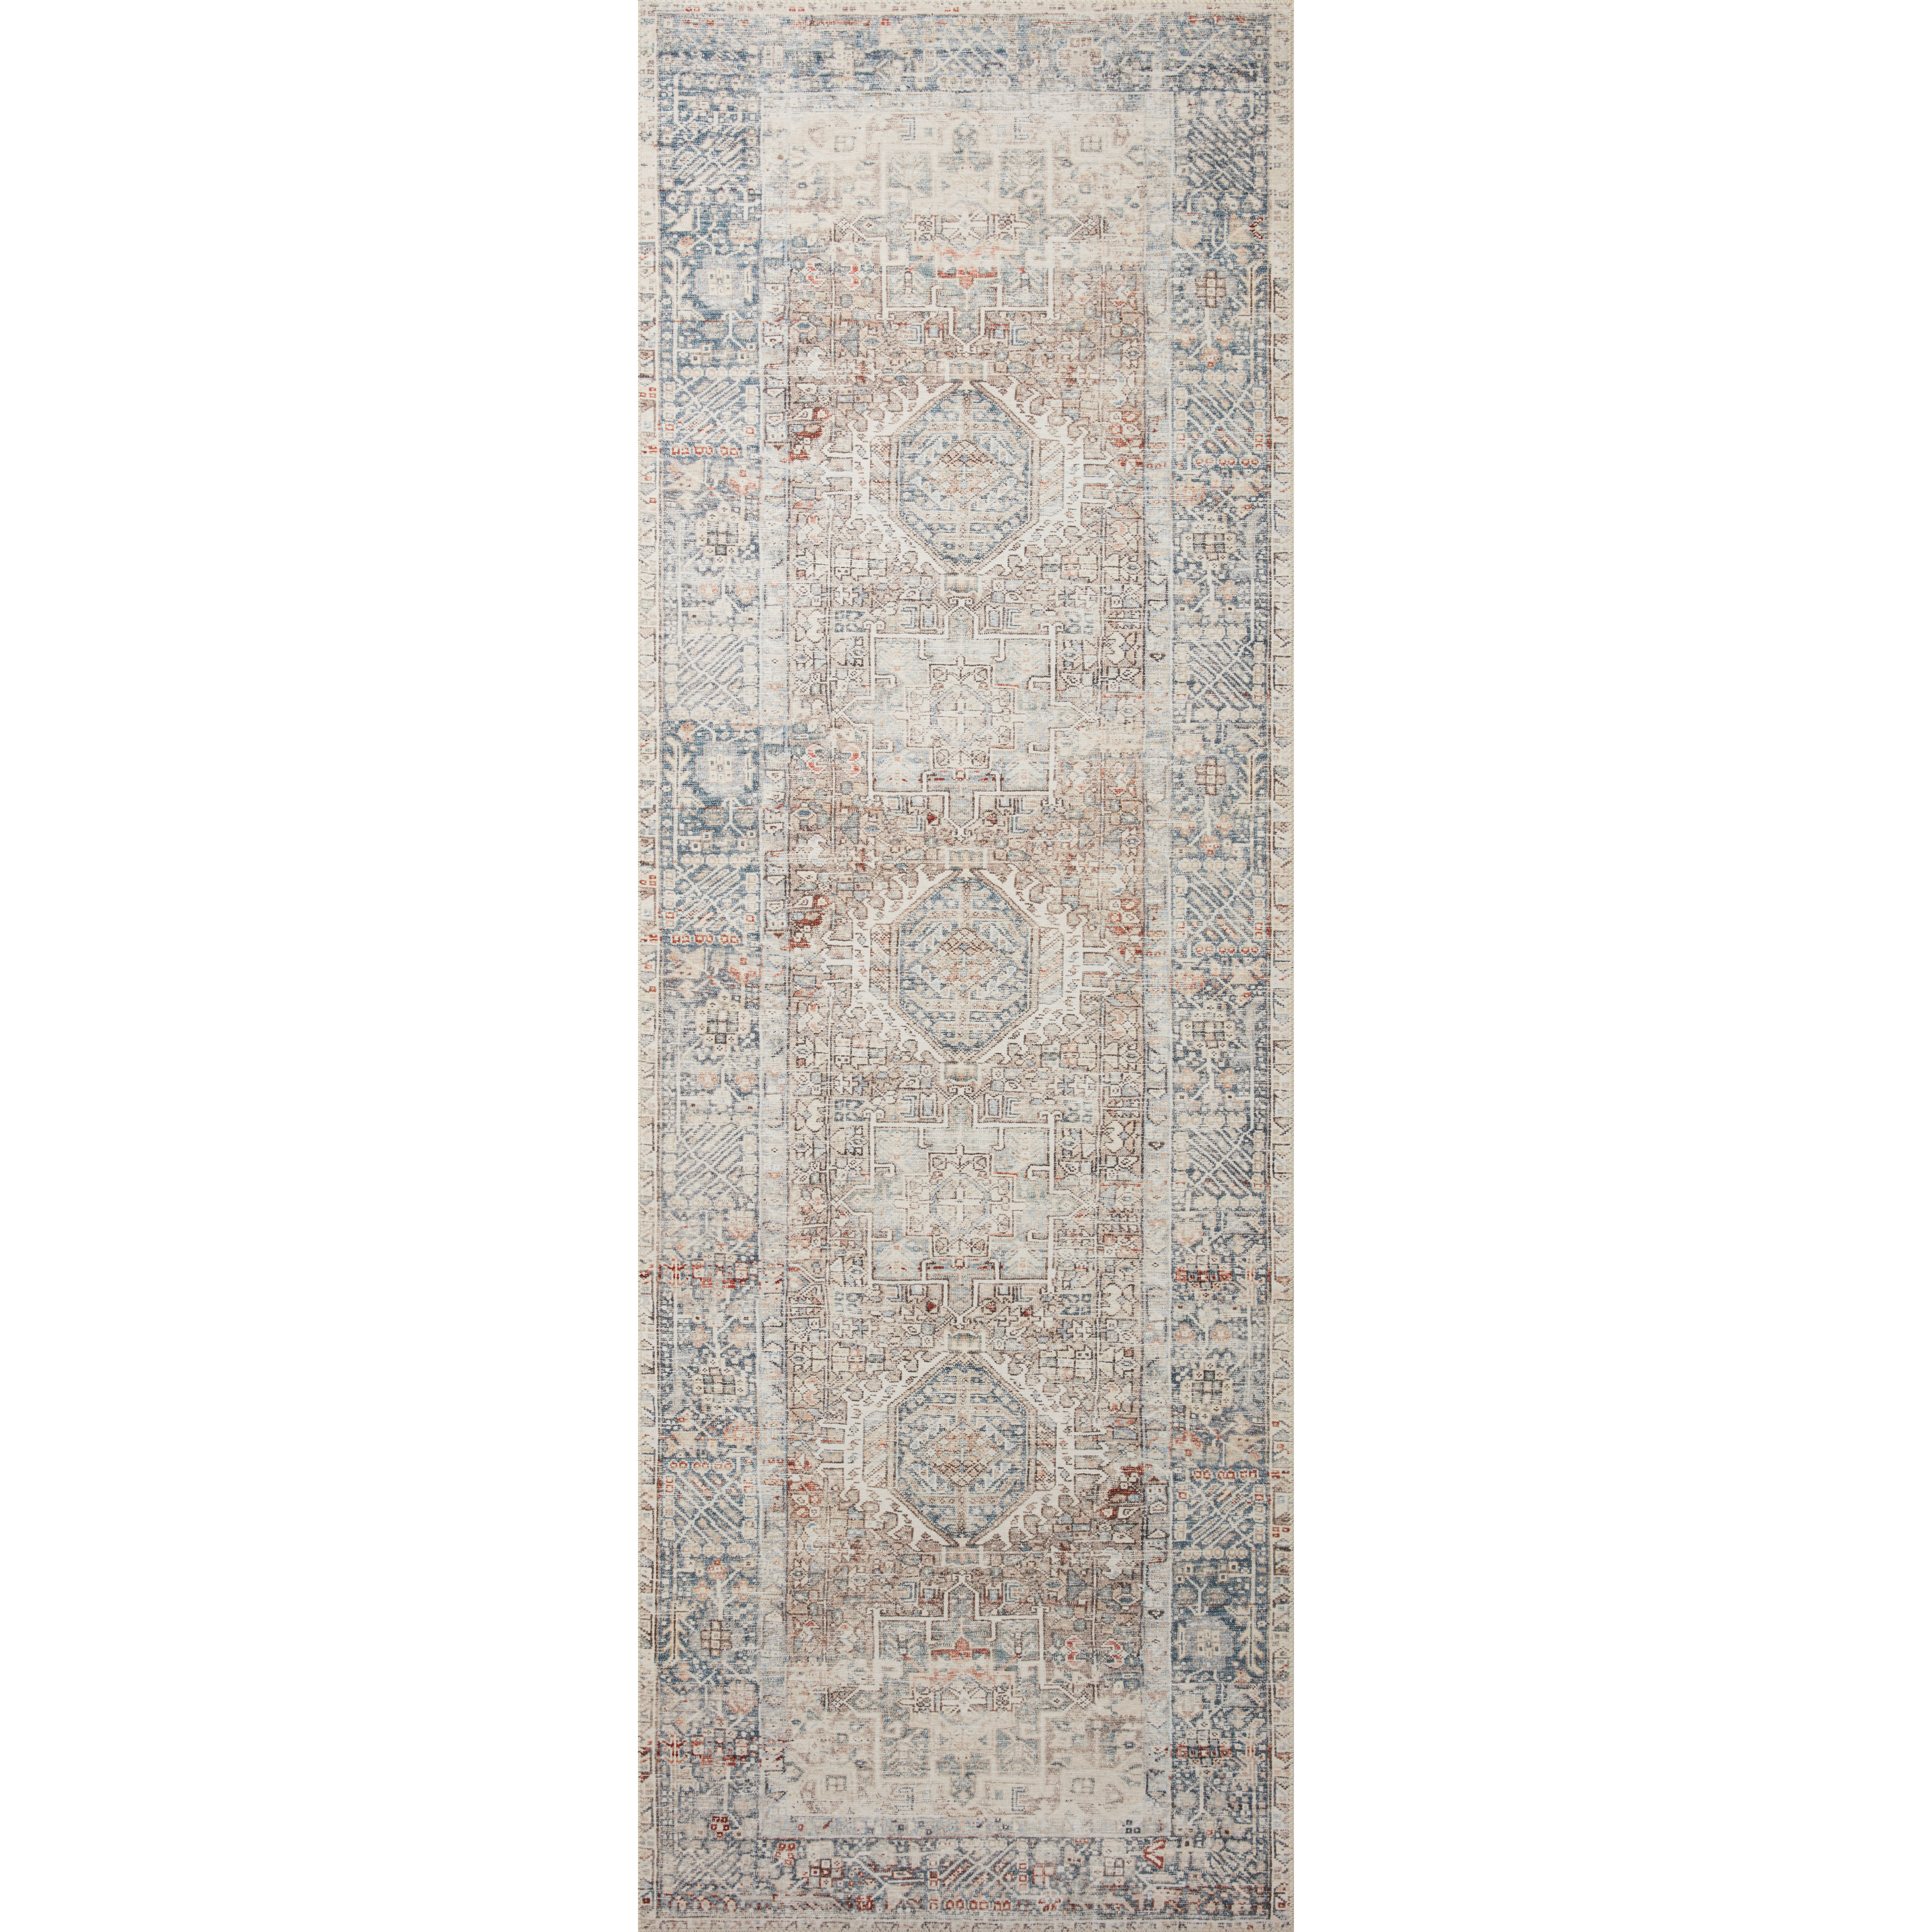 Durable, low pile, and soft underfoot, this rug is inspired by classic vintage and antique rugs. The Jules Chris Loves Julia Natural / Ocean JUL-07 rug from Loloi features a beautiful vintage pattern and patina. The rug is easy to clean and maintain and perfect for living rooms, dining rooms, hallways, and kitchens!